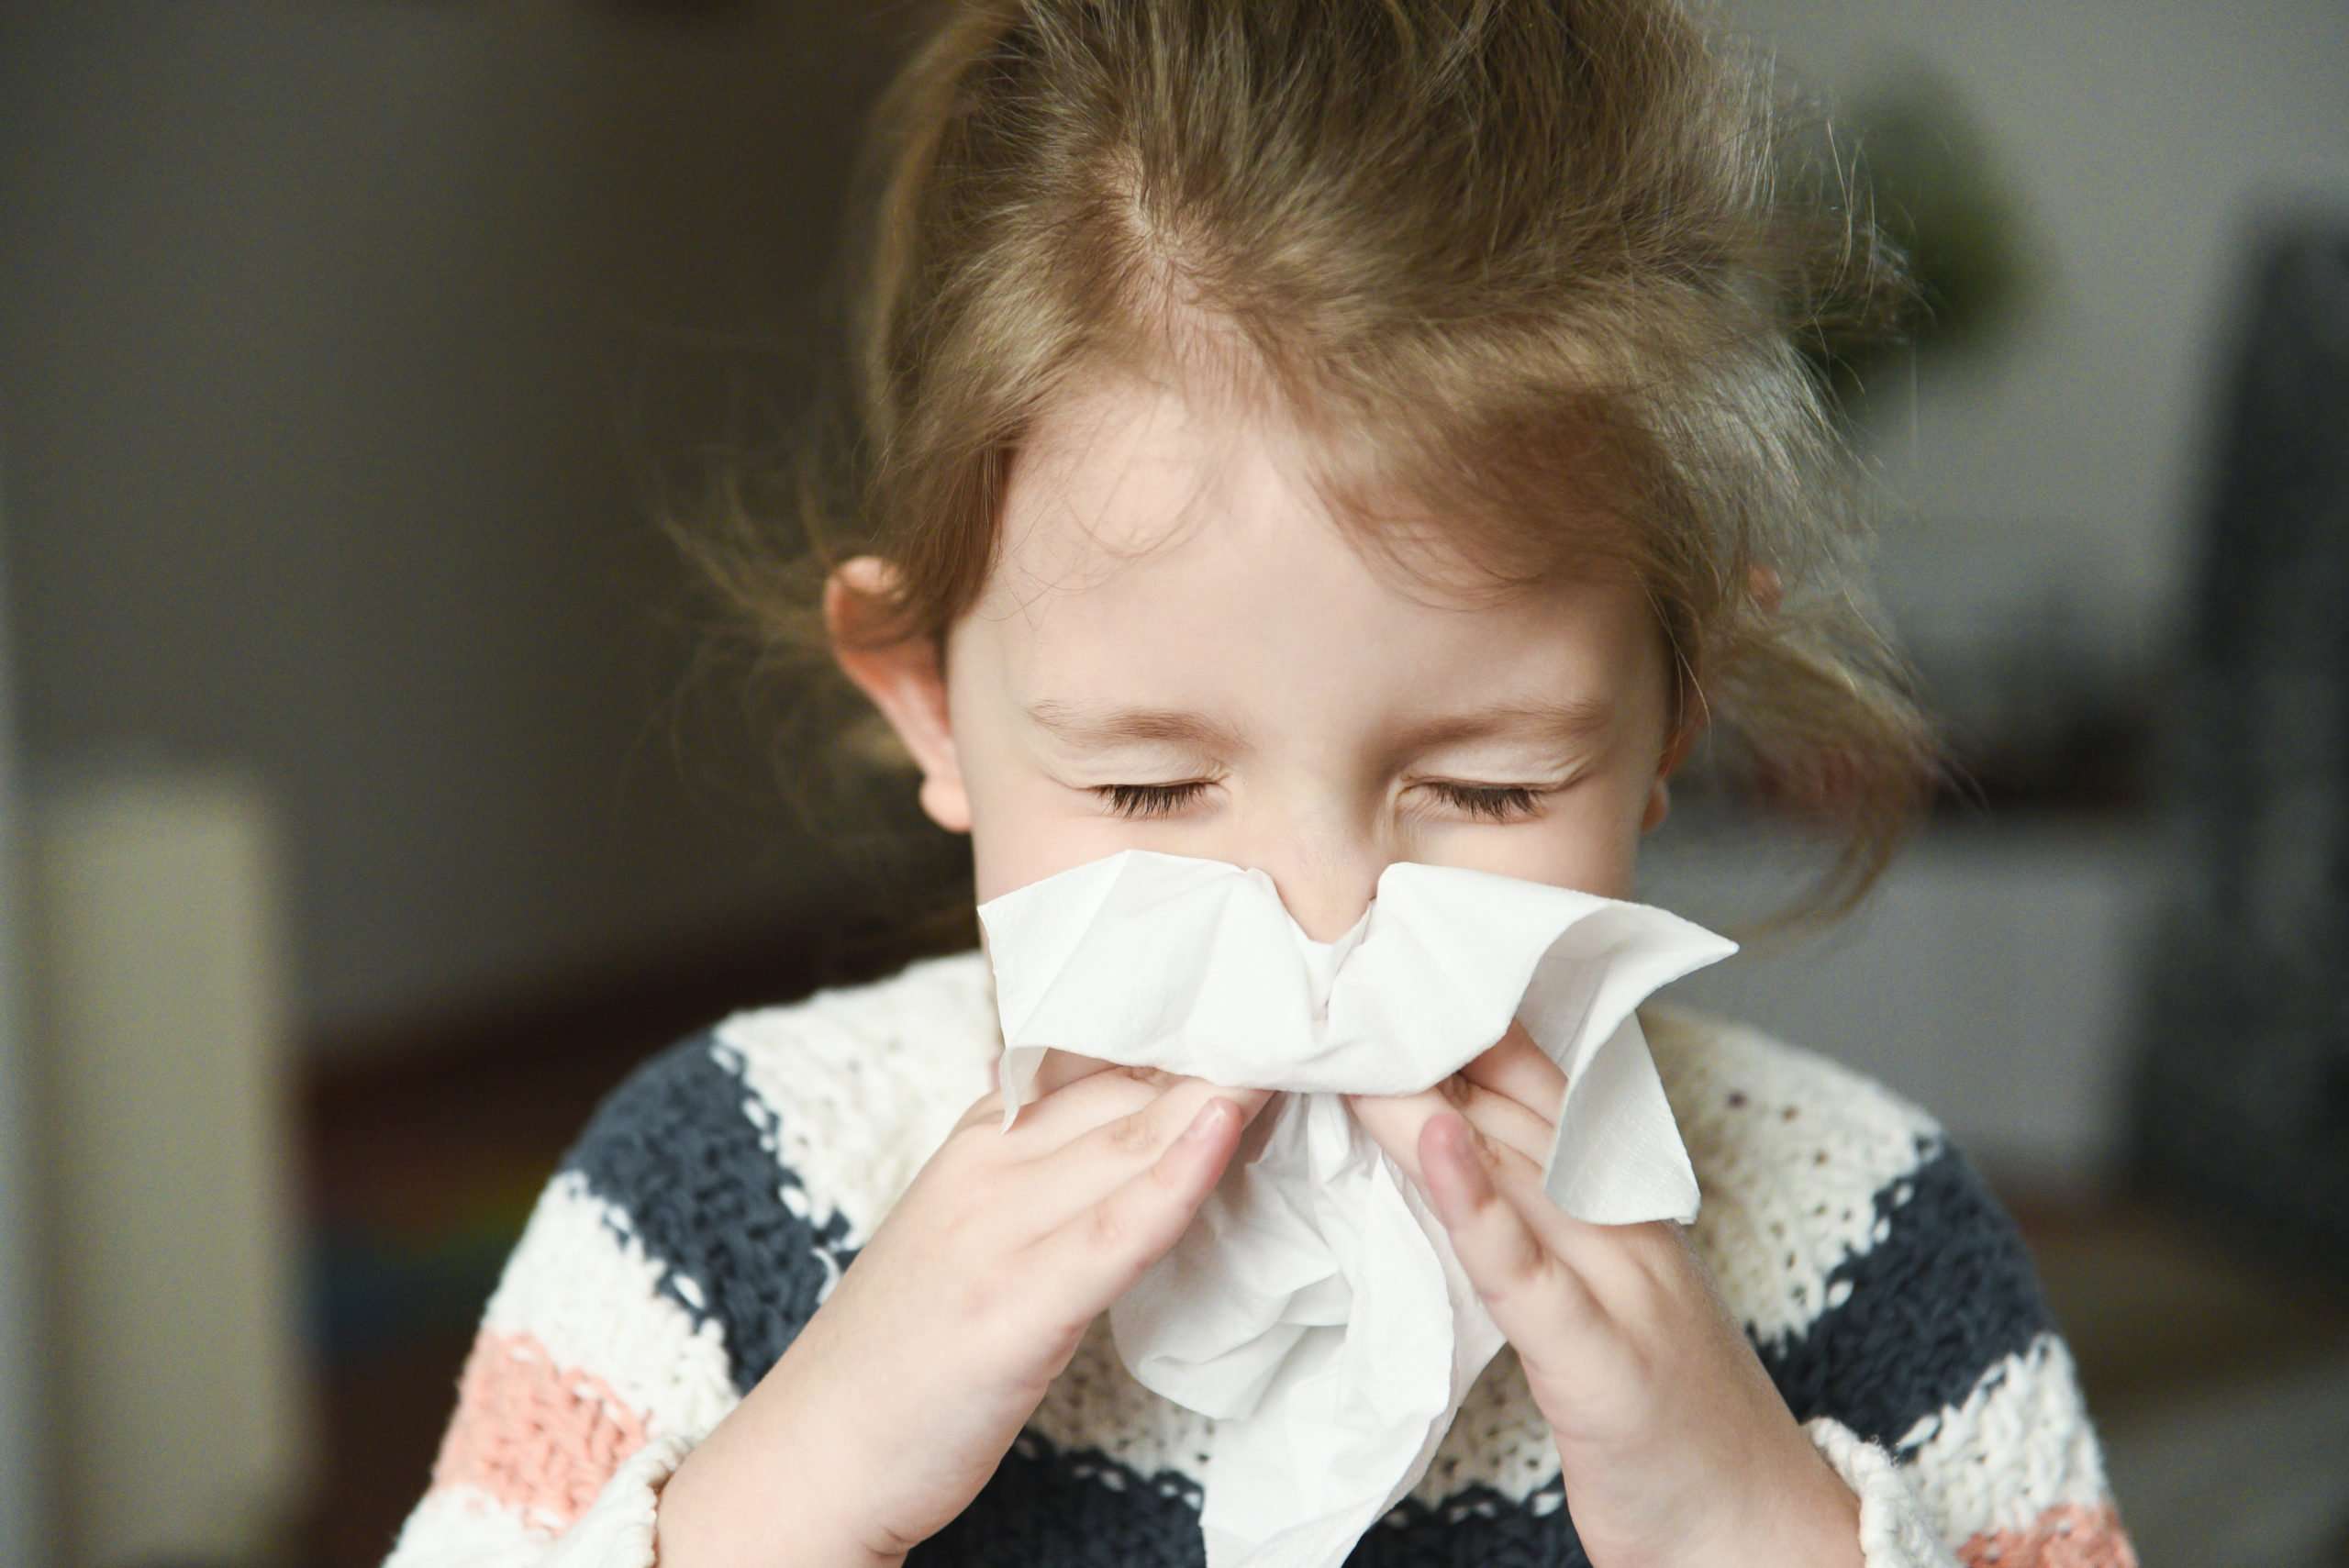 Little Girl with Allergies Blowing Nose with Tissue